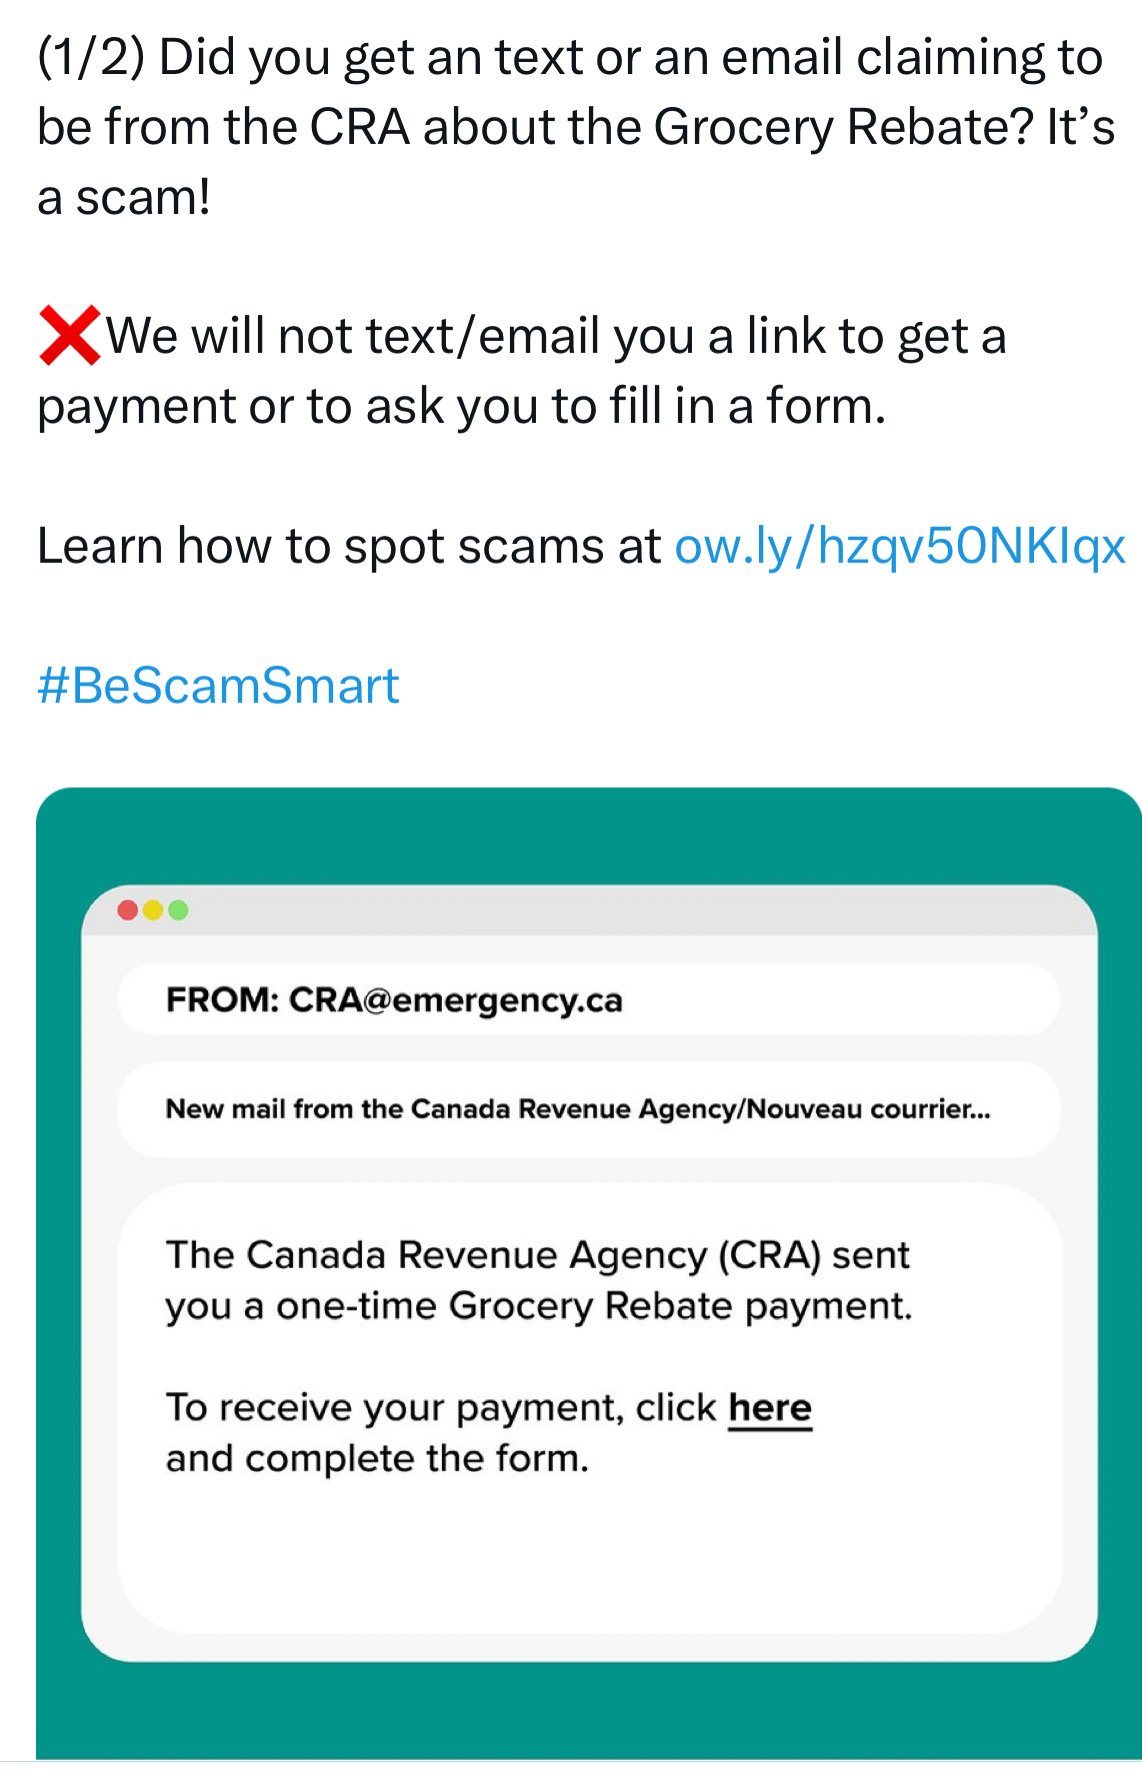 cra-warns-about-grocery-rebate-scam-mj-independent